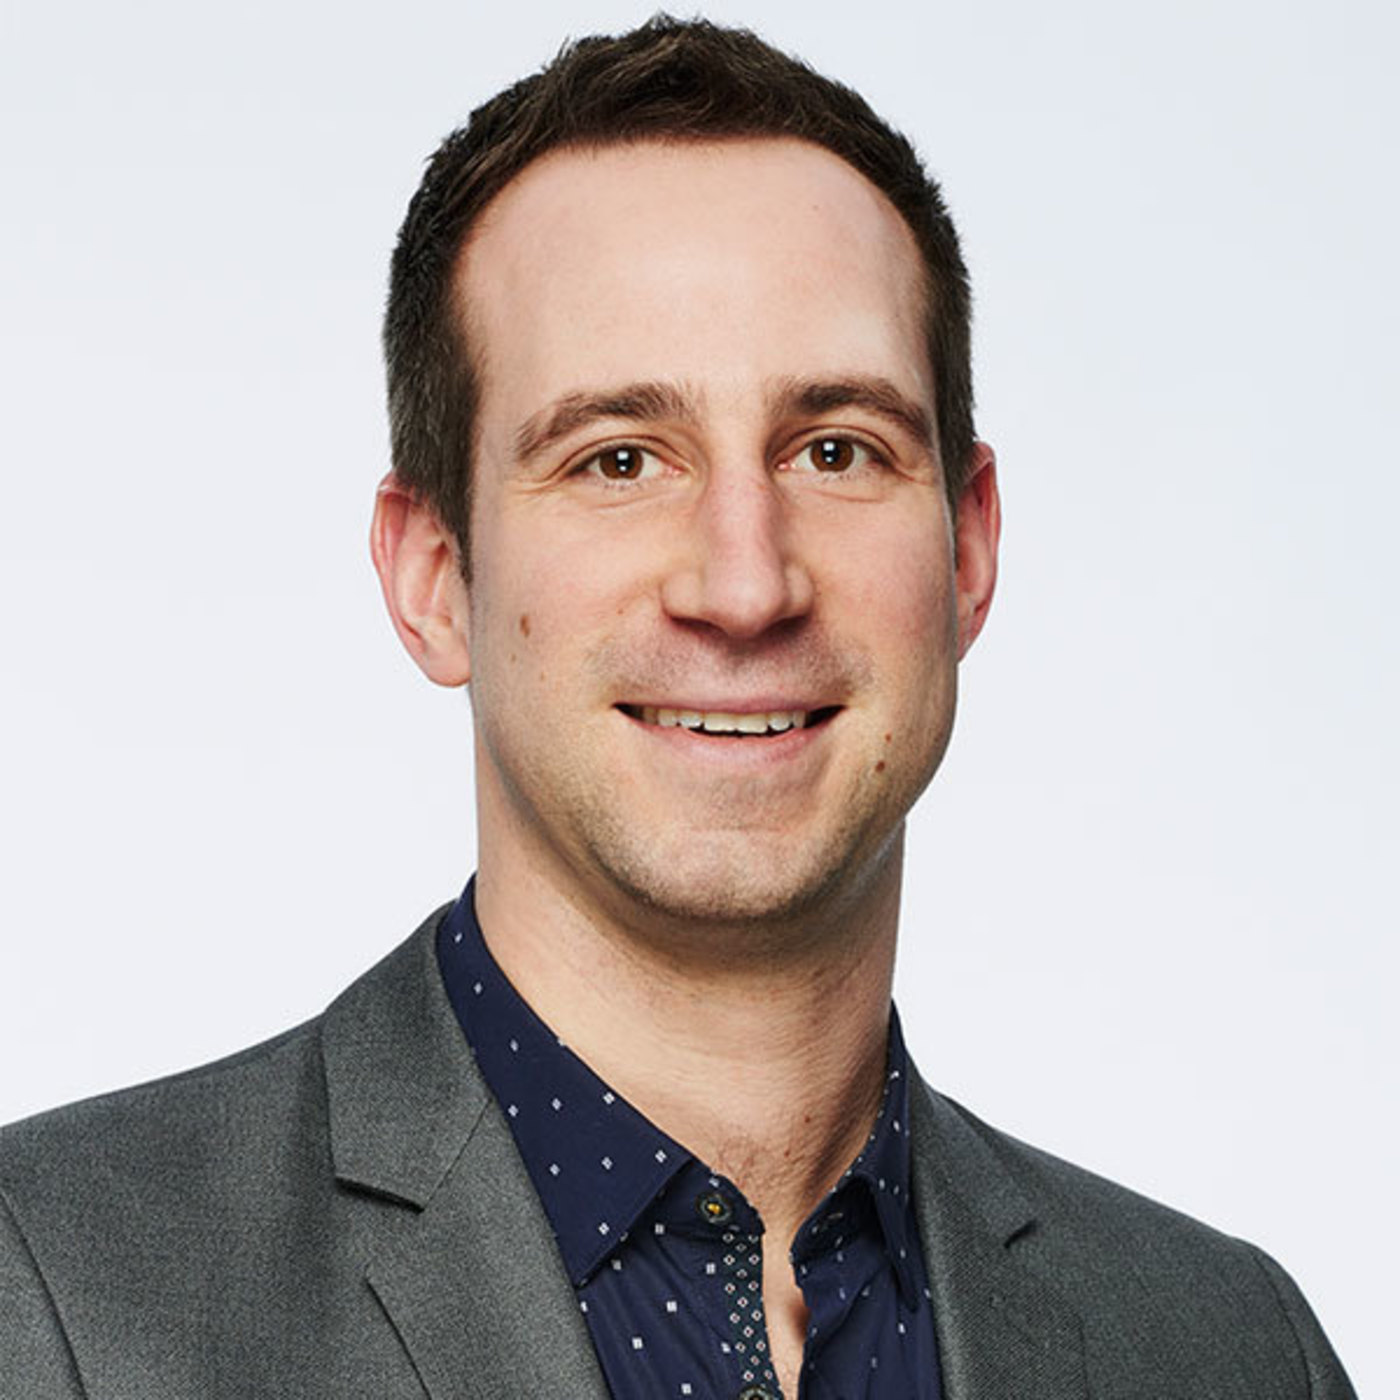 An Interview With Mike McShane, Director of Business and Partnerships at Bell Media